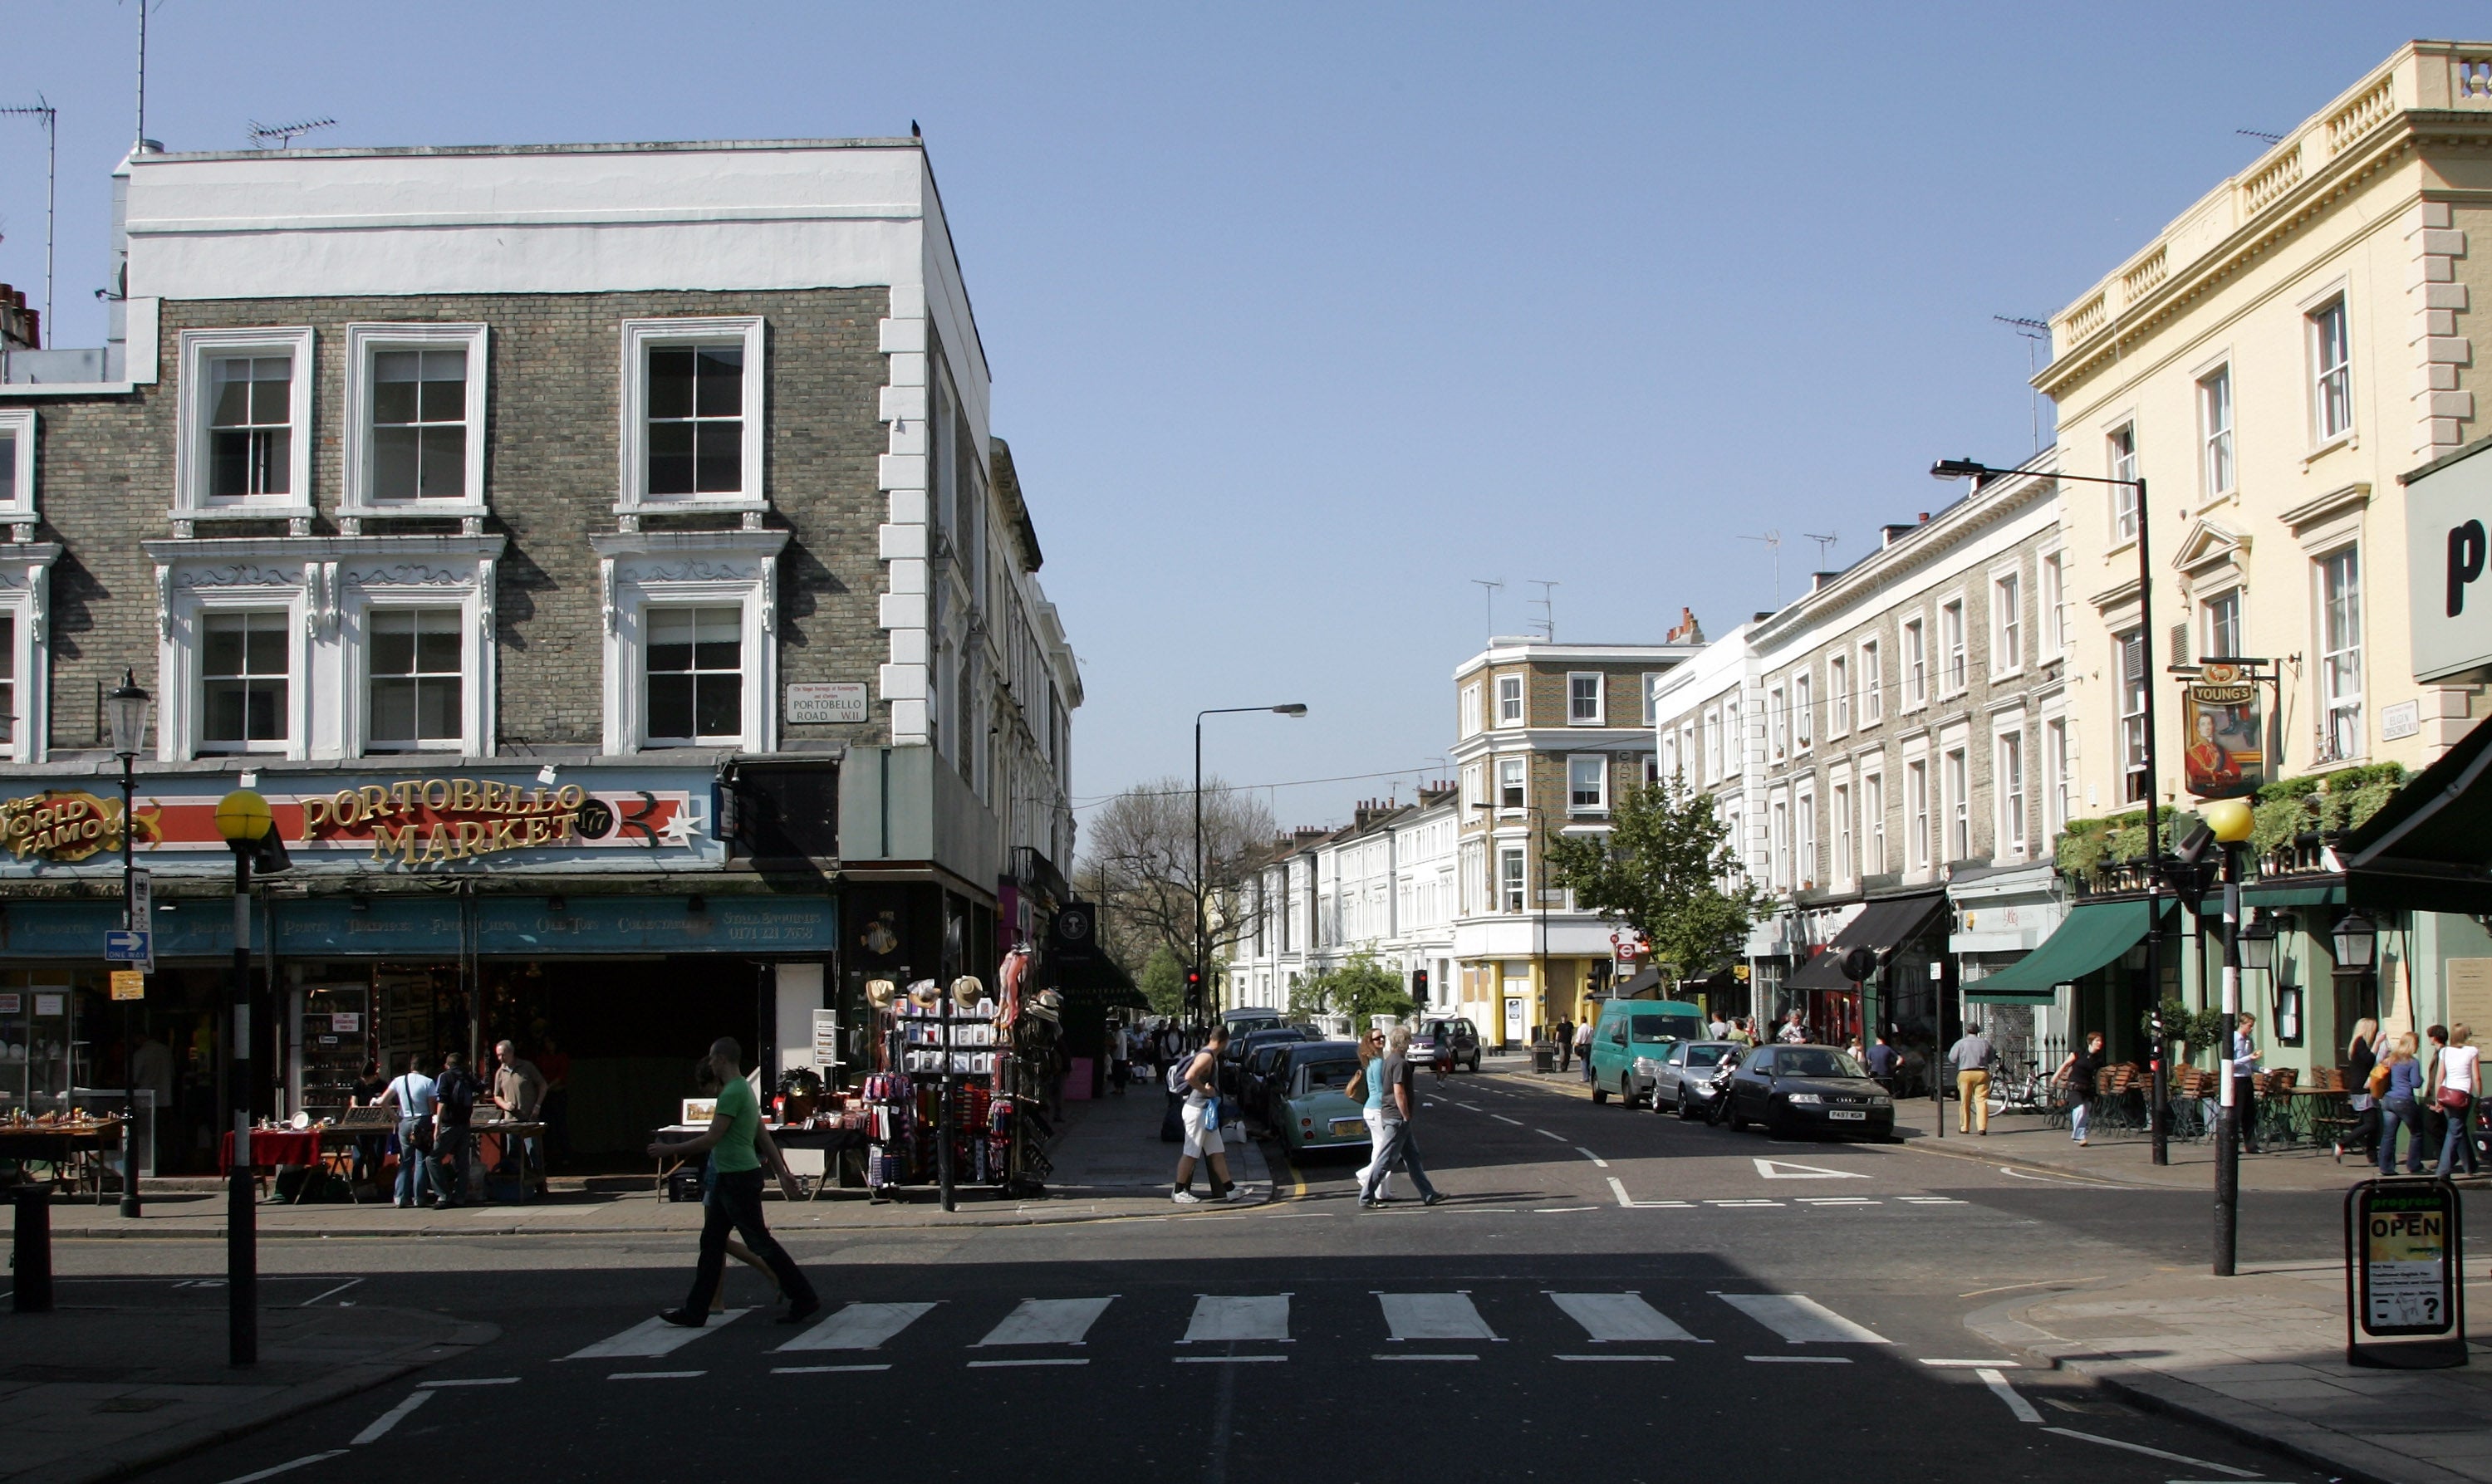 A man was fatally stabbed on Portobello Road (generic view of street)